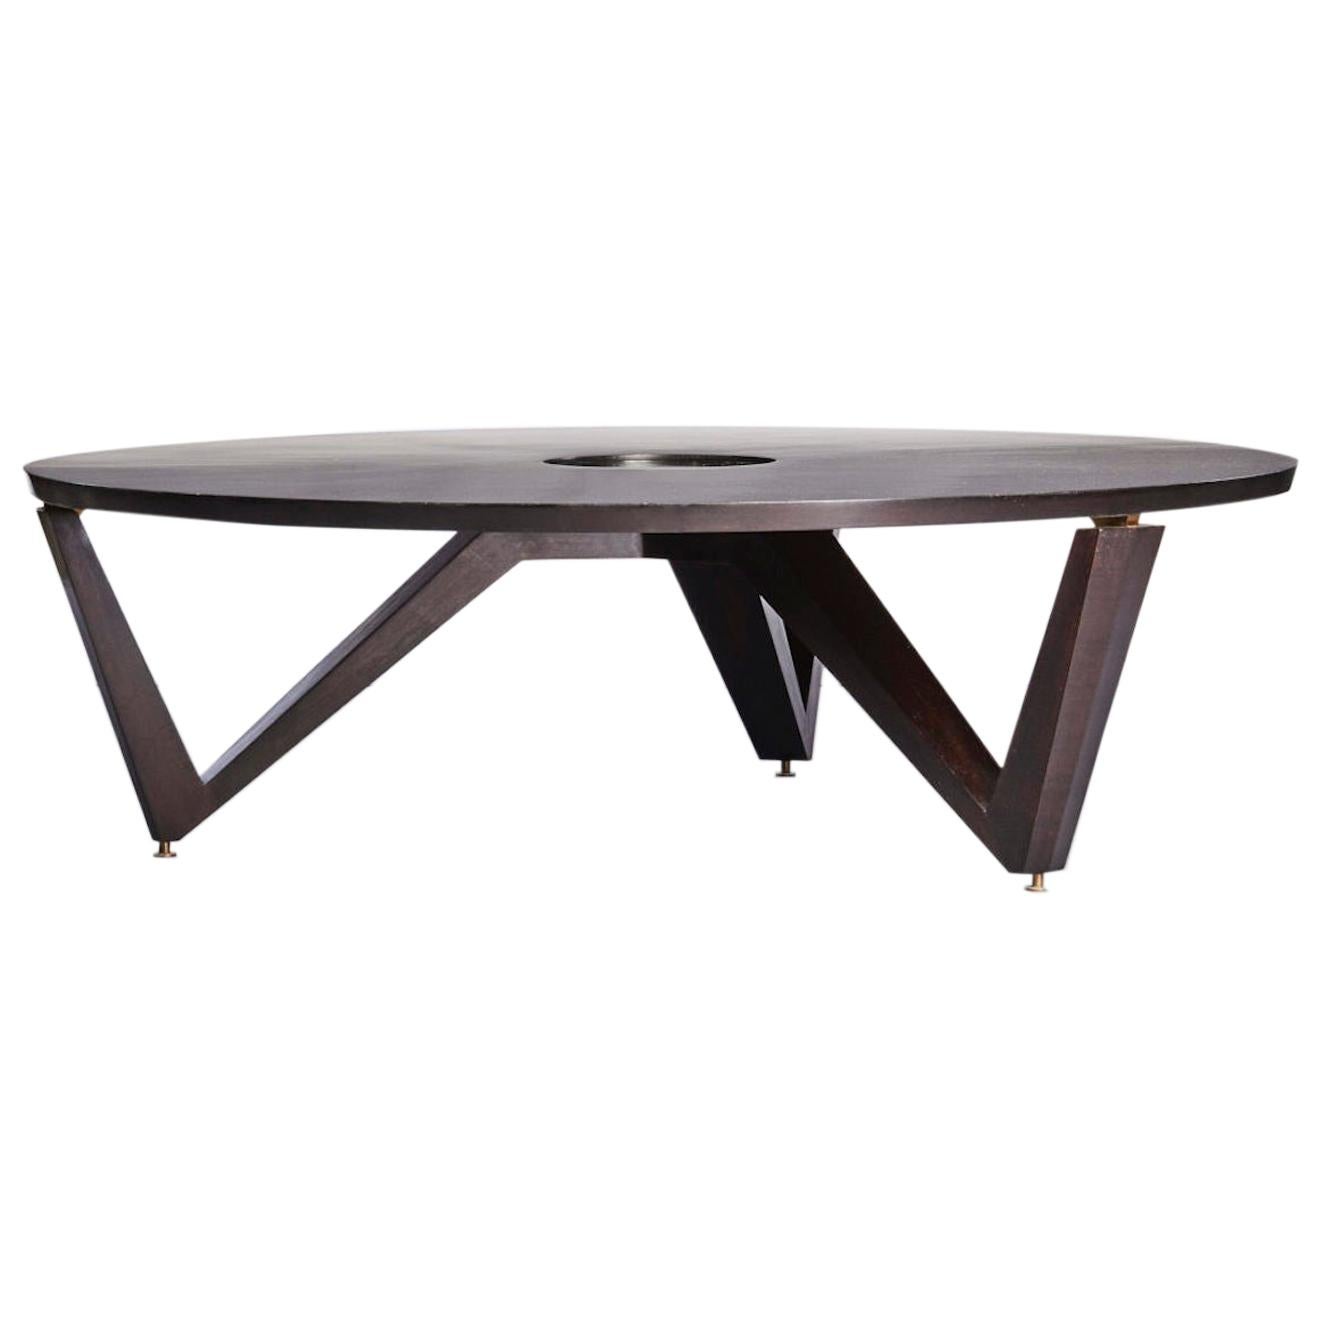 Maxime Old Saturne Table Made of Cuba Mahogany Wood and Glass